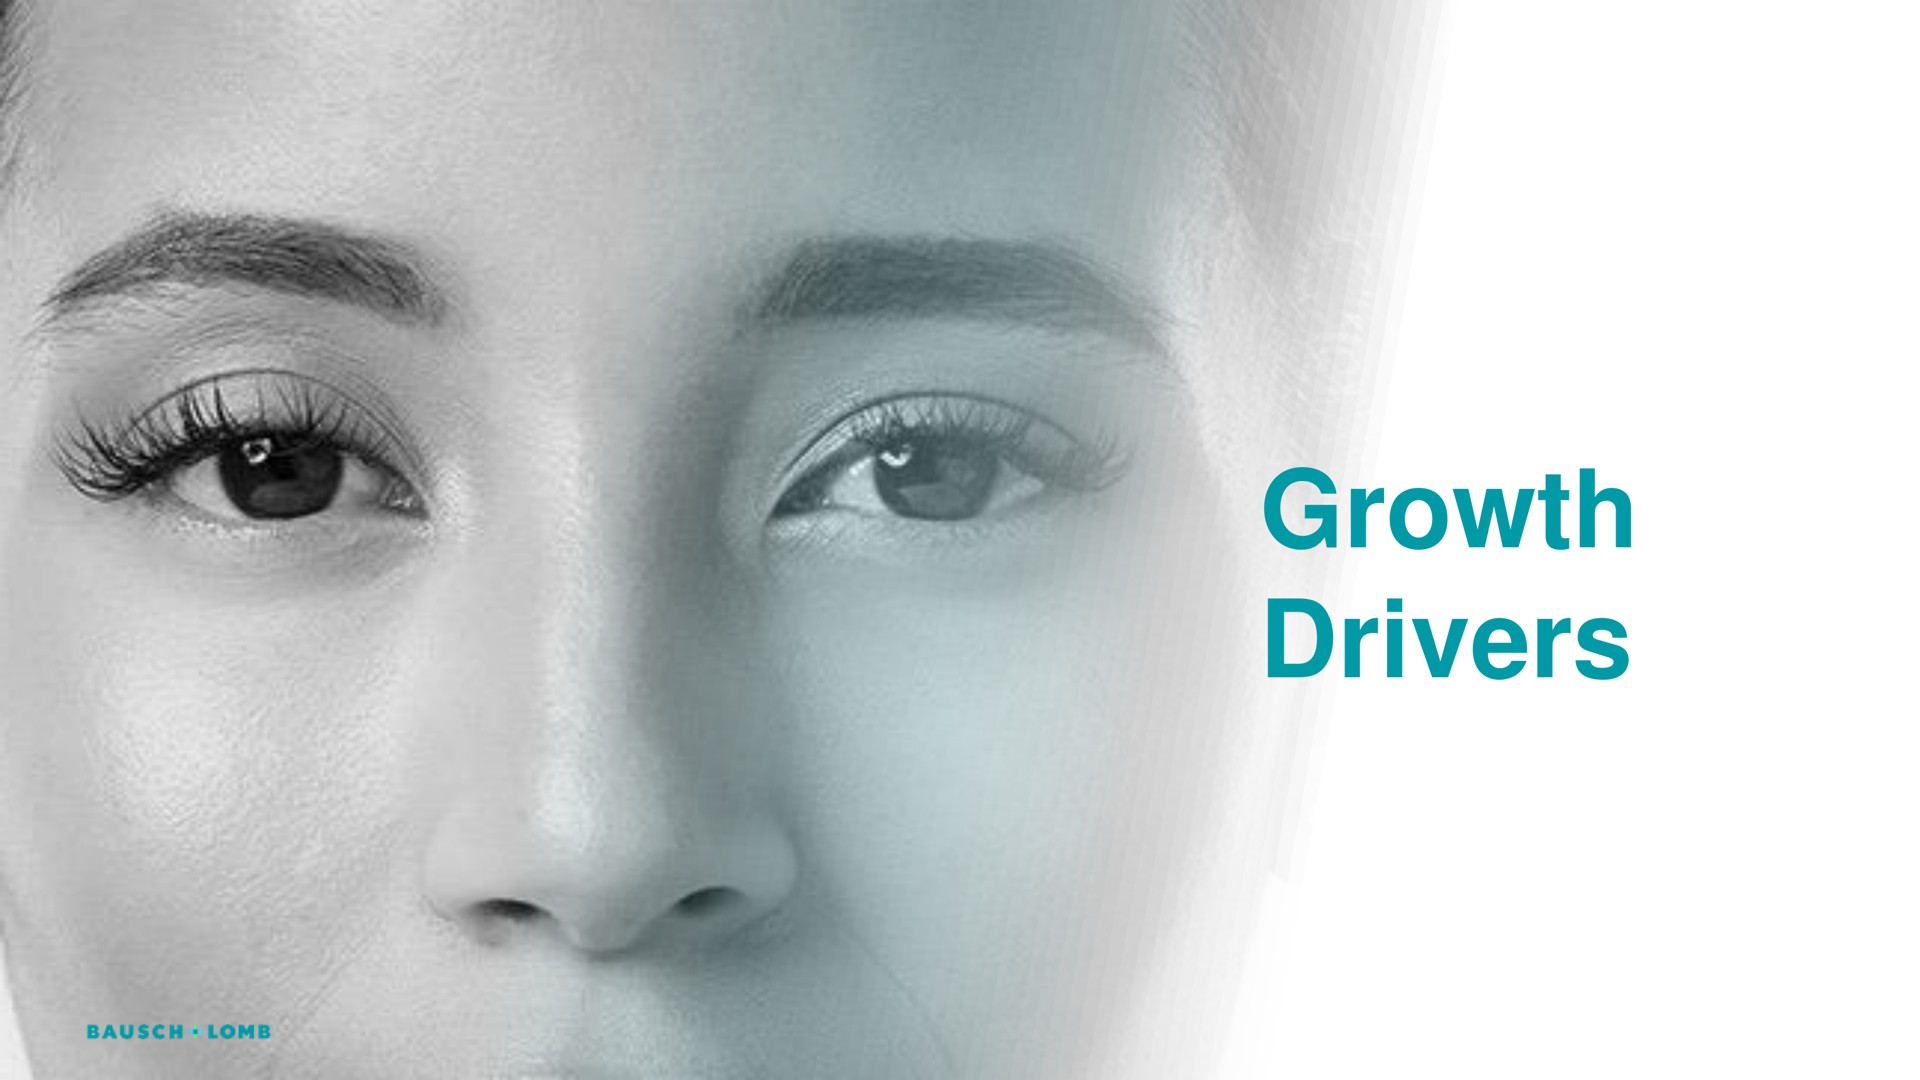 growth drivers | Bausch+Lomb